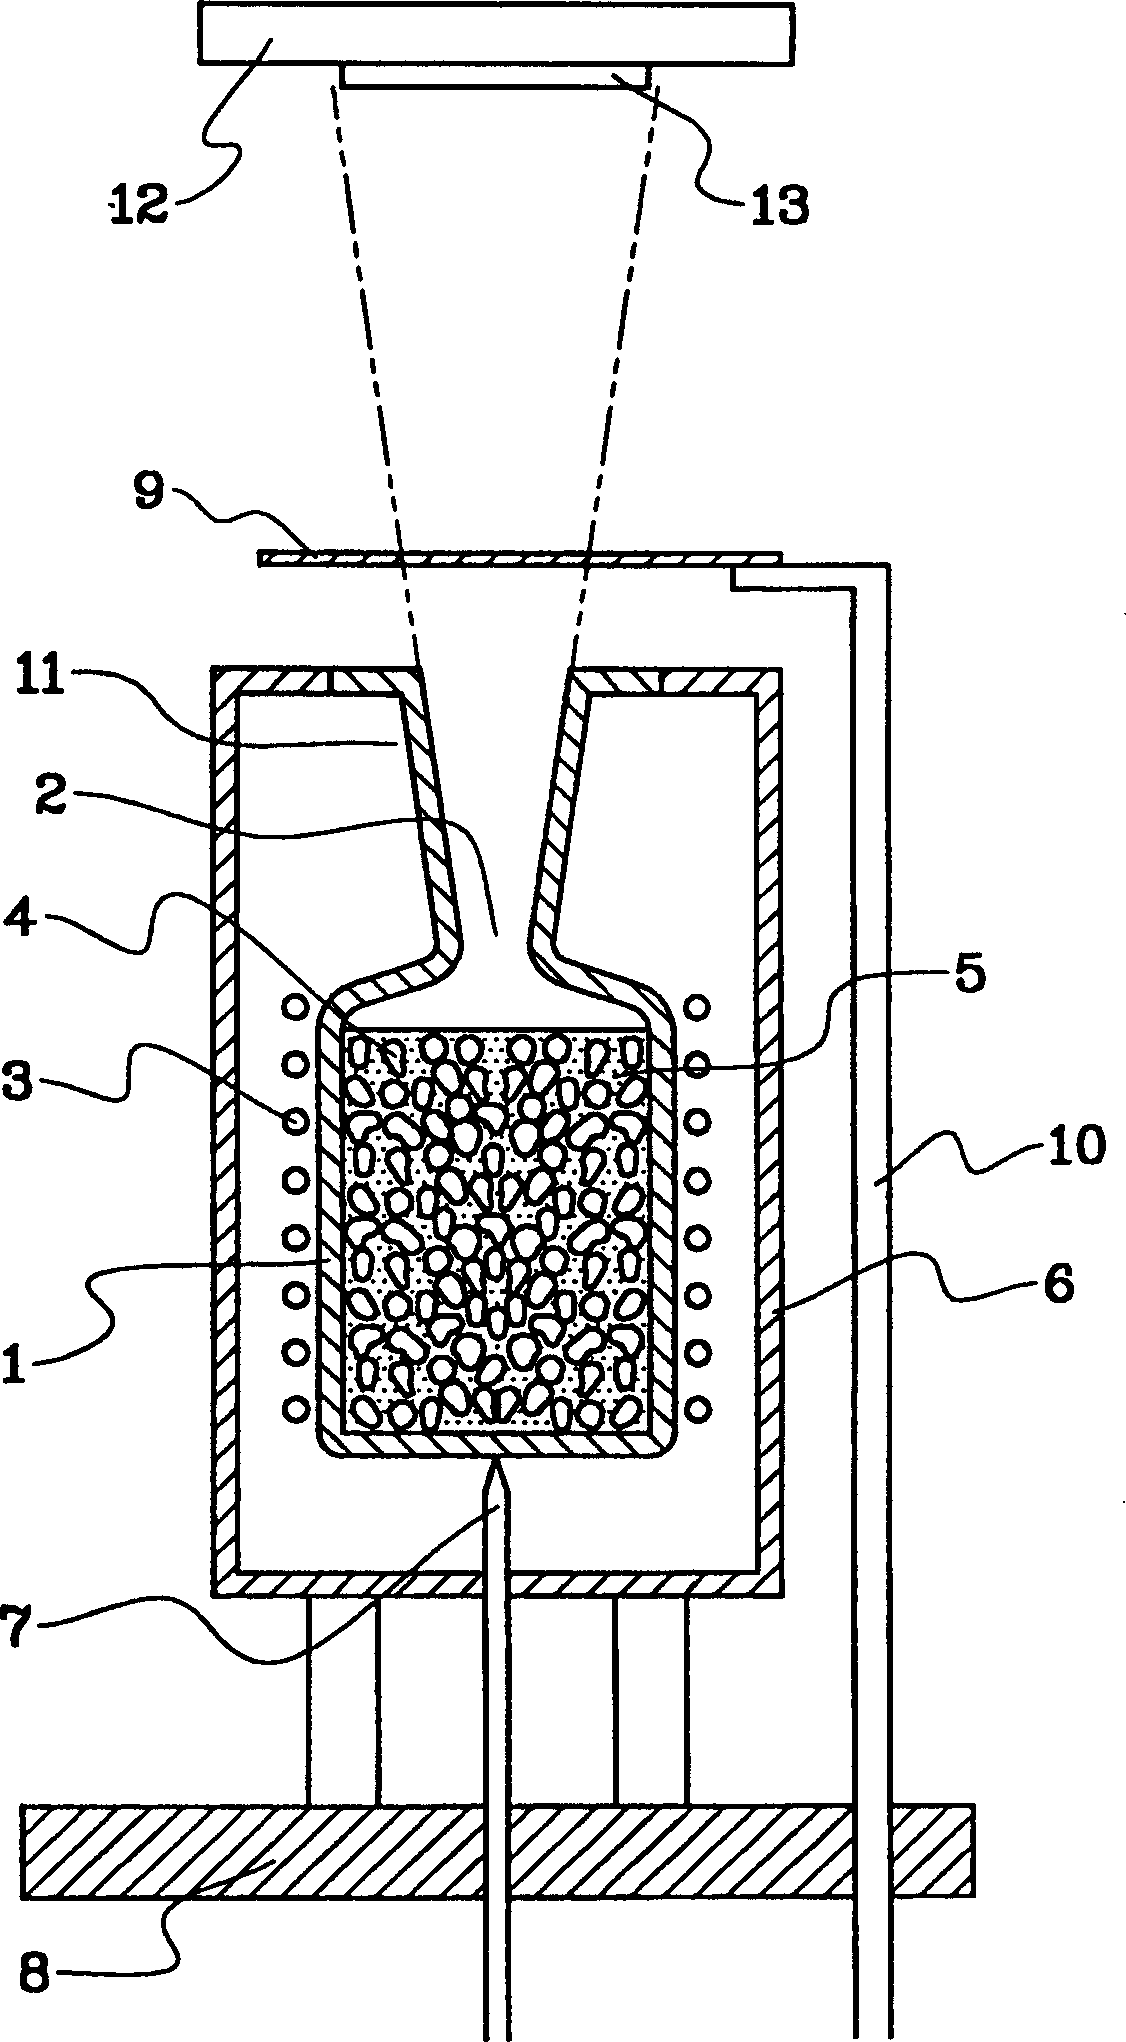 Molecular beam source apparatus for film deposition and method for depositing film by molecular beam